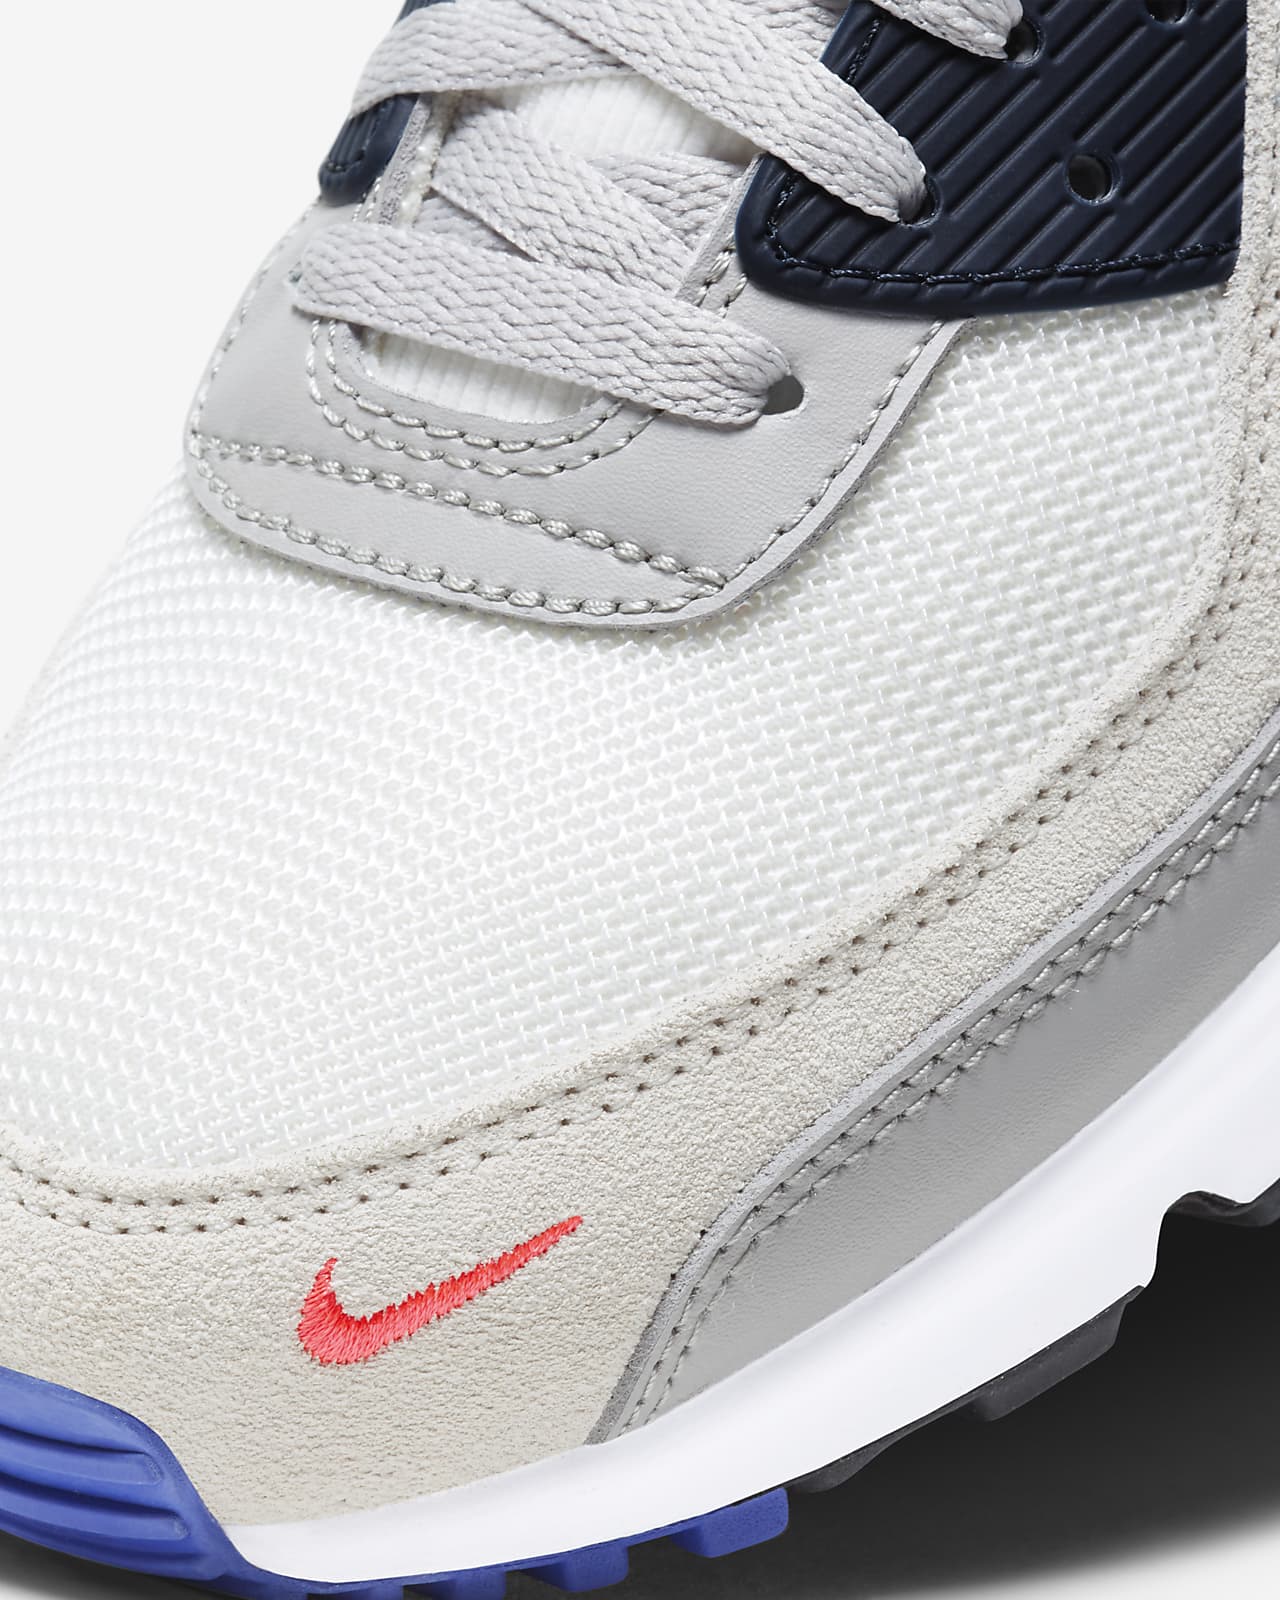 nike air max 90 offers